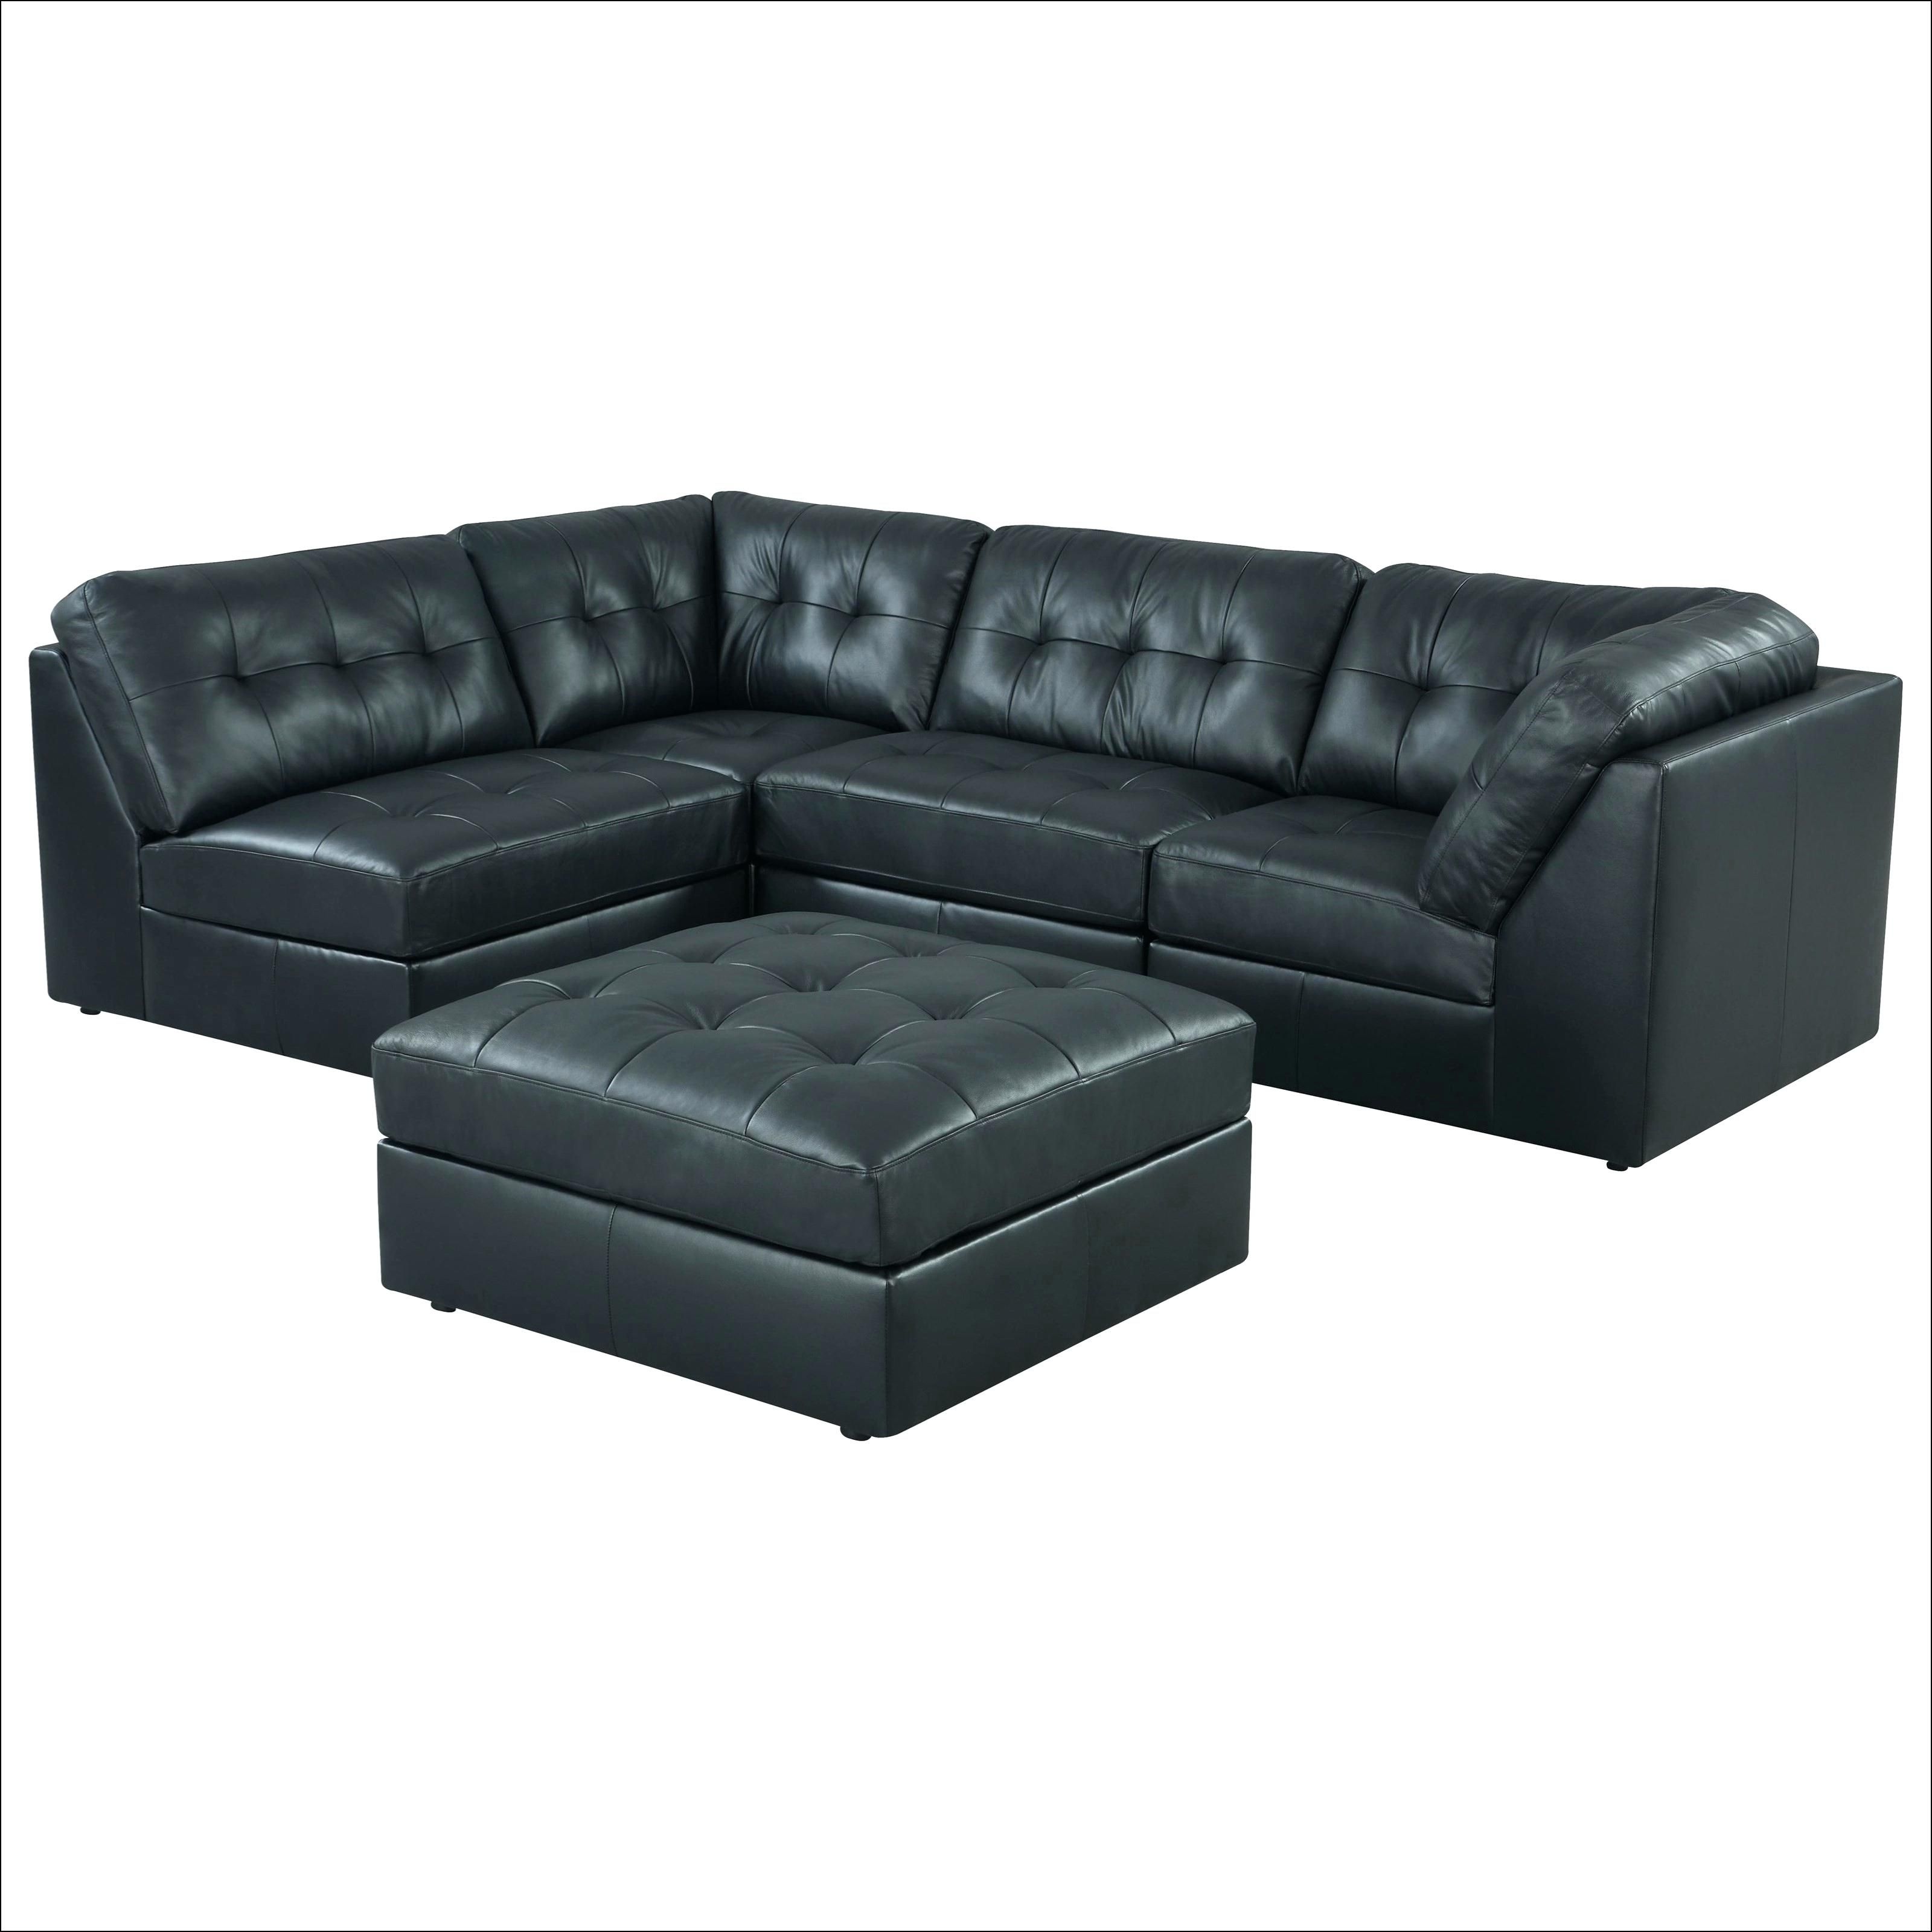 Craigslist Little Rock Furnitureowner Sofa Bed Best Of Used Throughout Little Rock Ar Sectional Sofas (View 3 of 10)